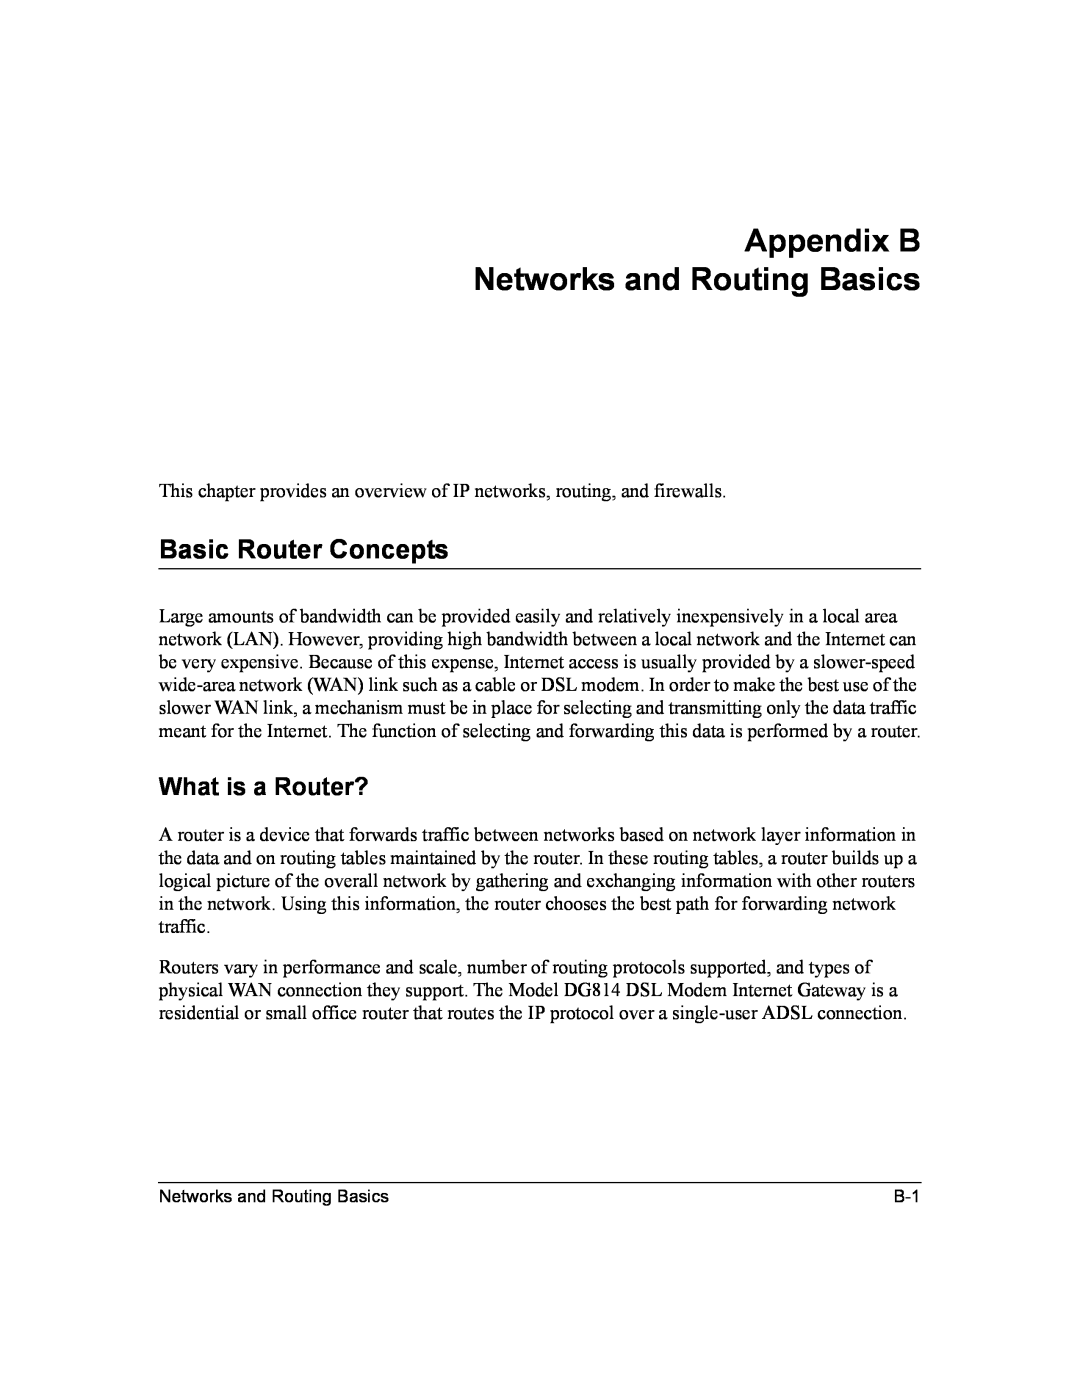 NETGEAR DG814 DSL manual Appendix B Networks and Routing Basics, Basic Router Concepts, What is a Router? 